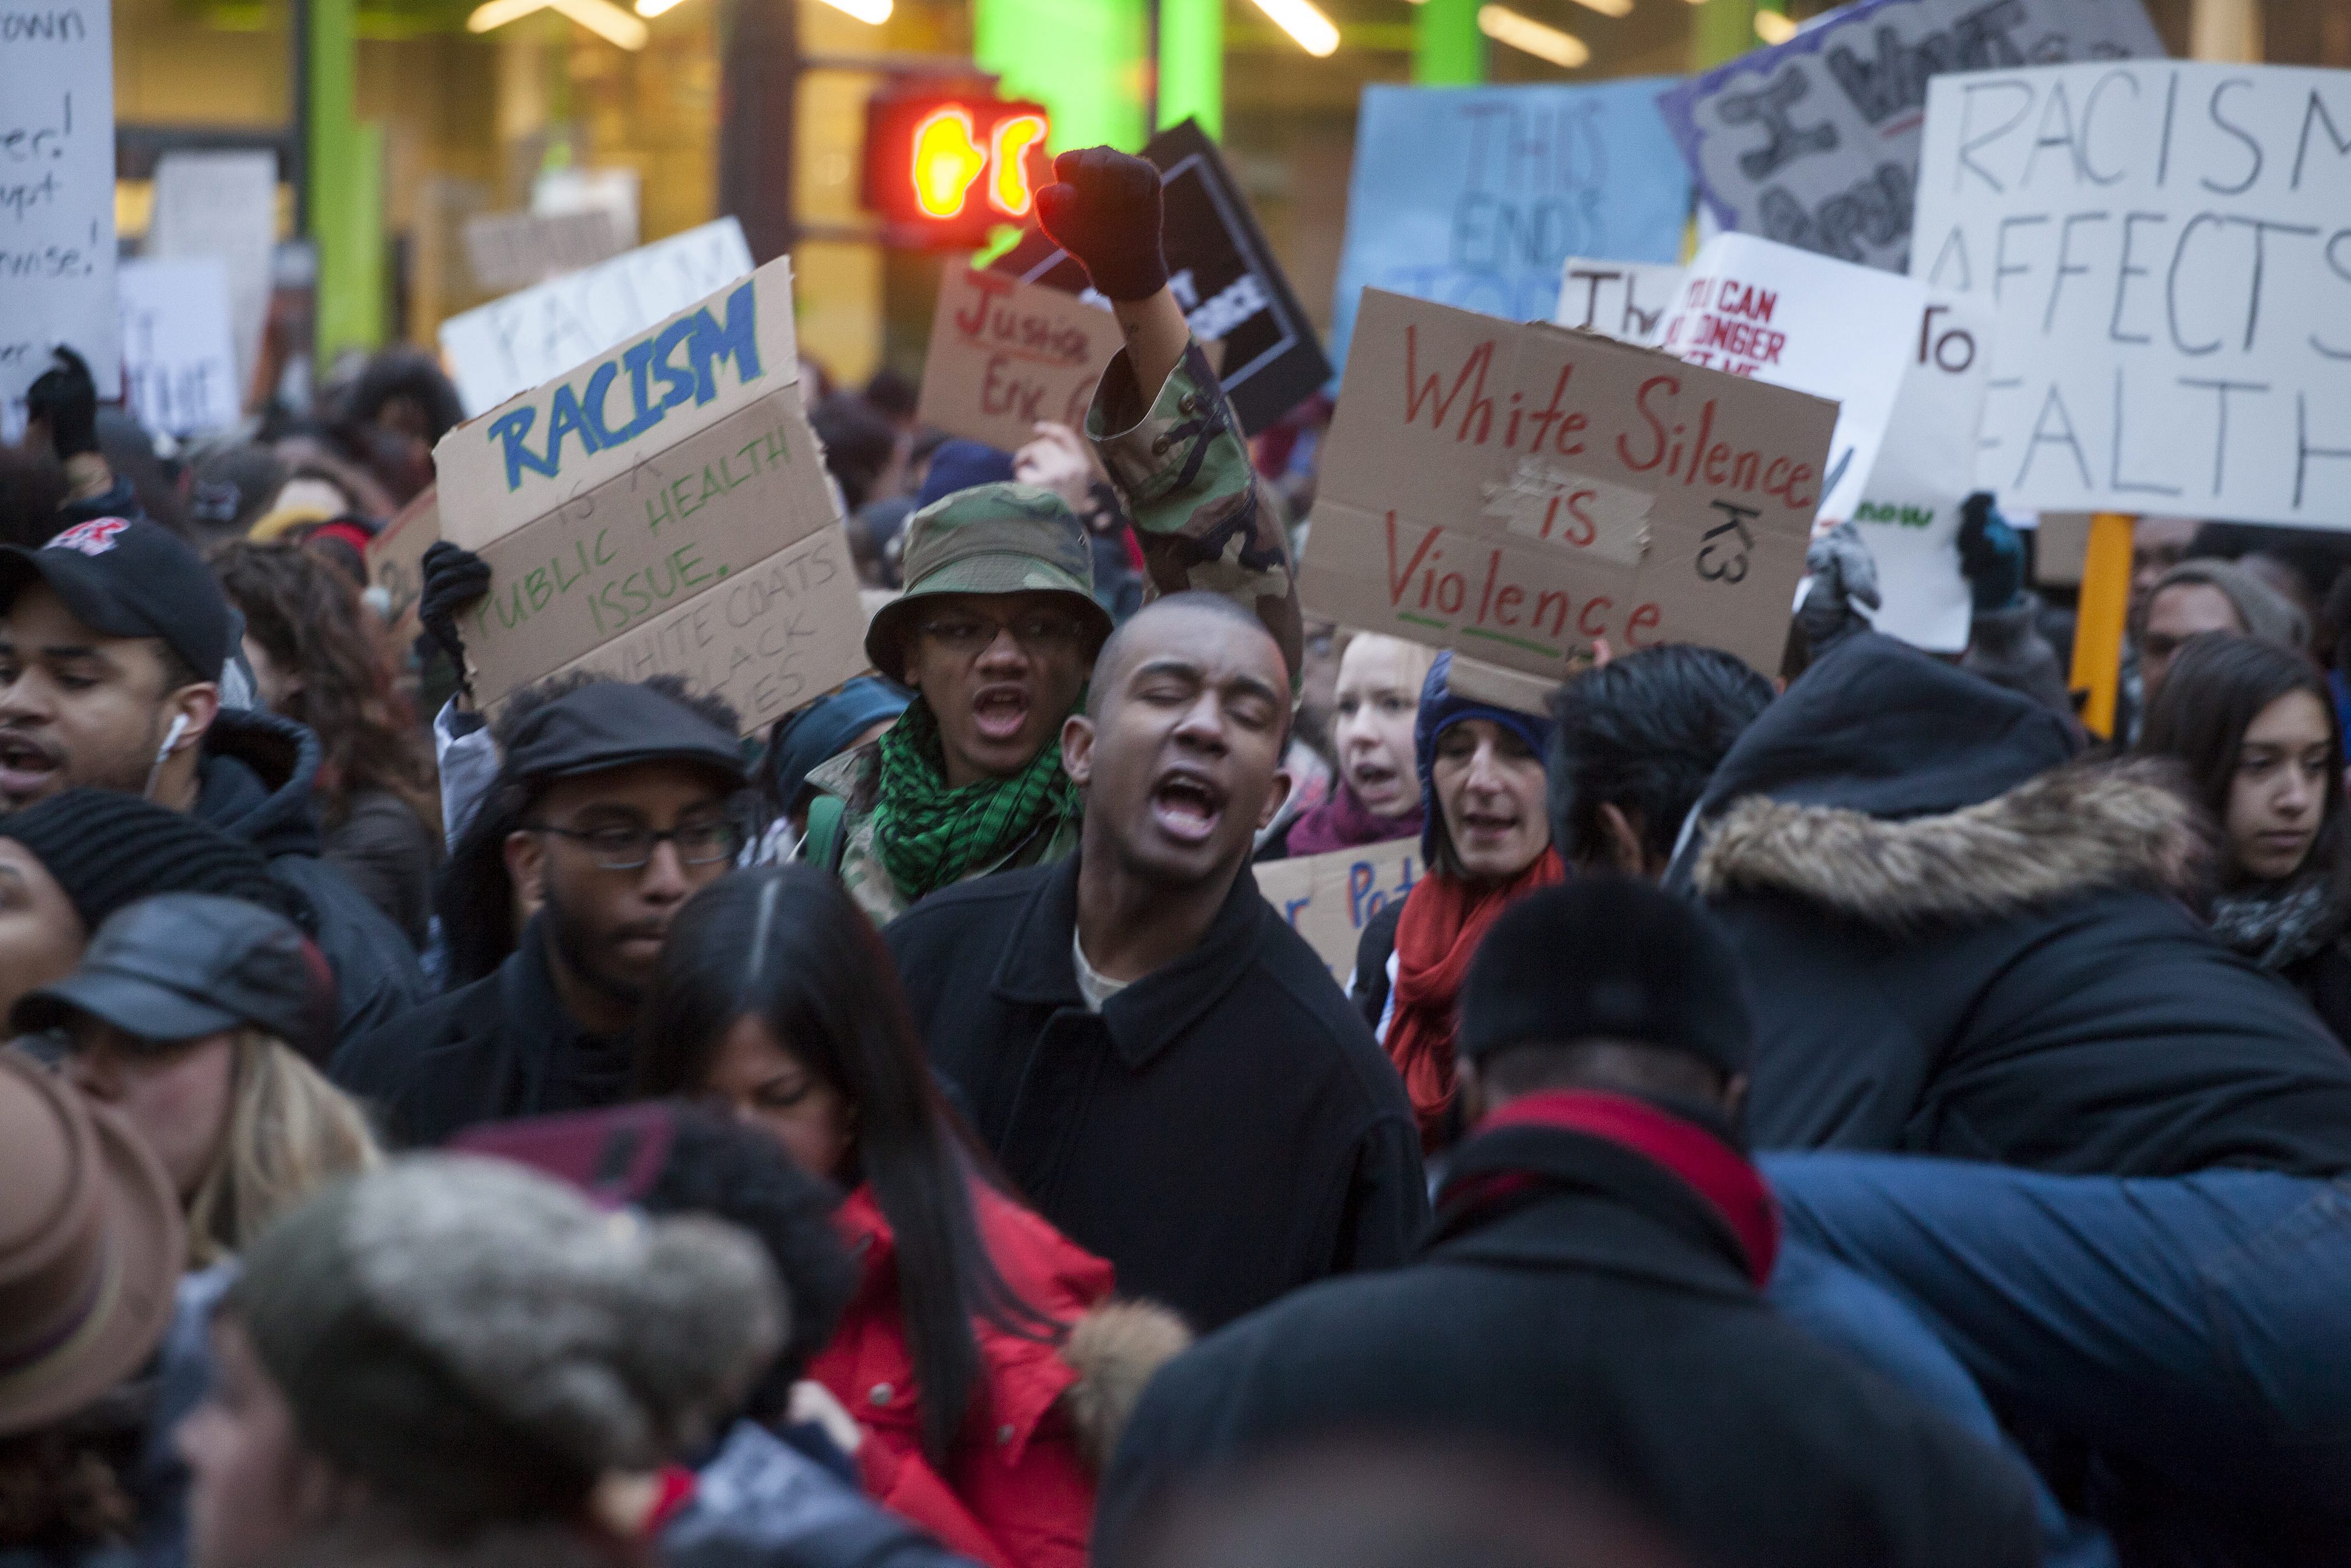 Protest against Grand Jury failure to indict police officer in Eric Garner case